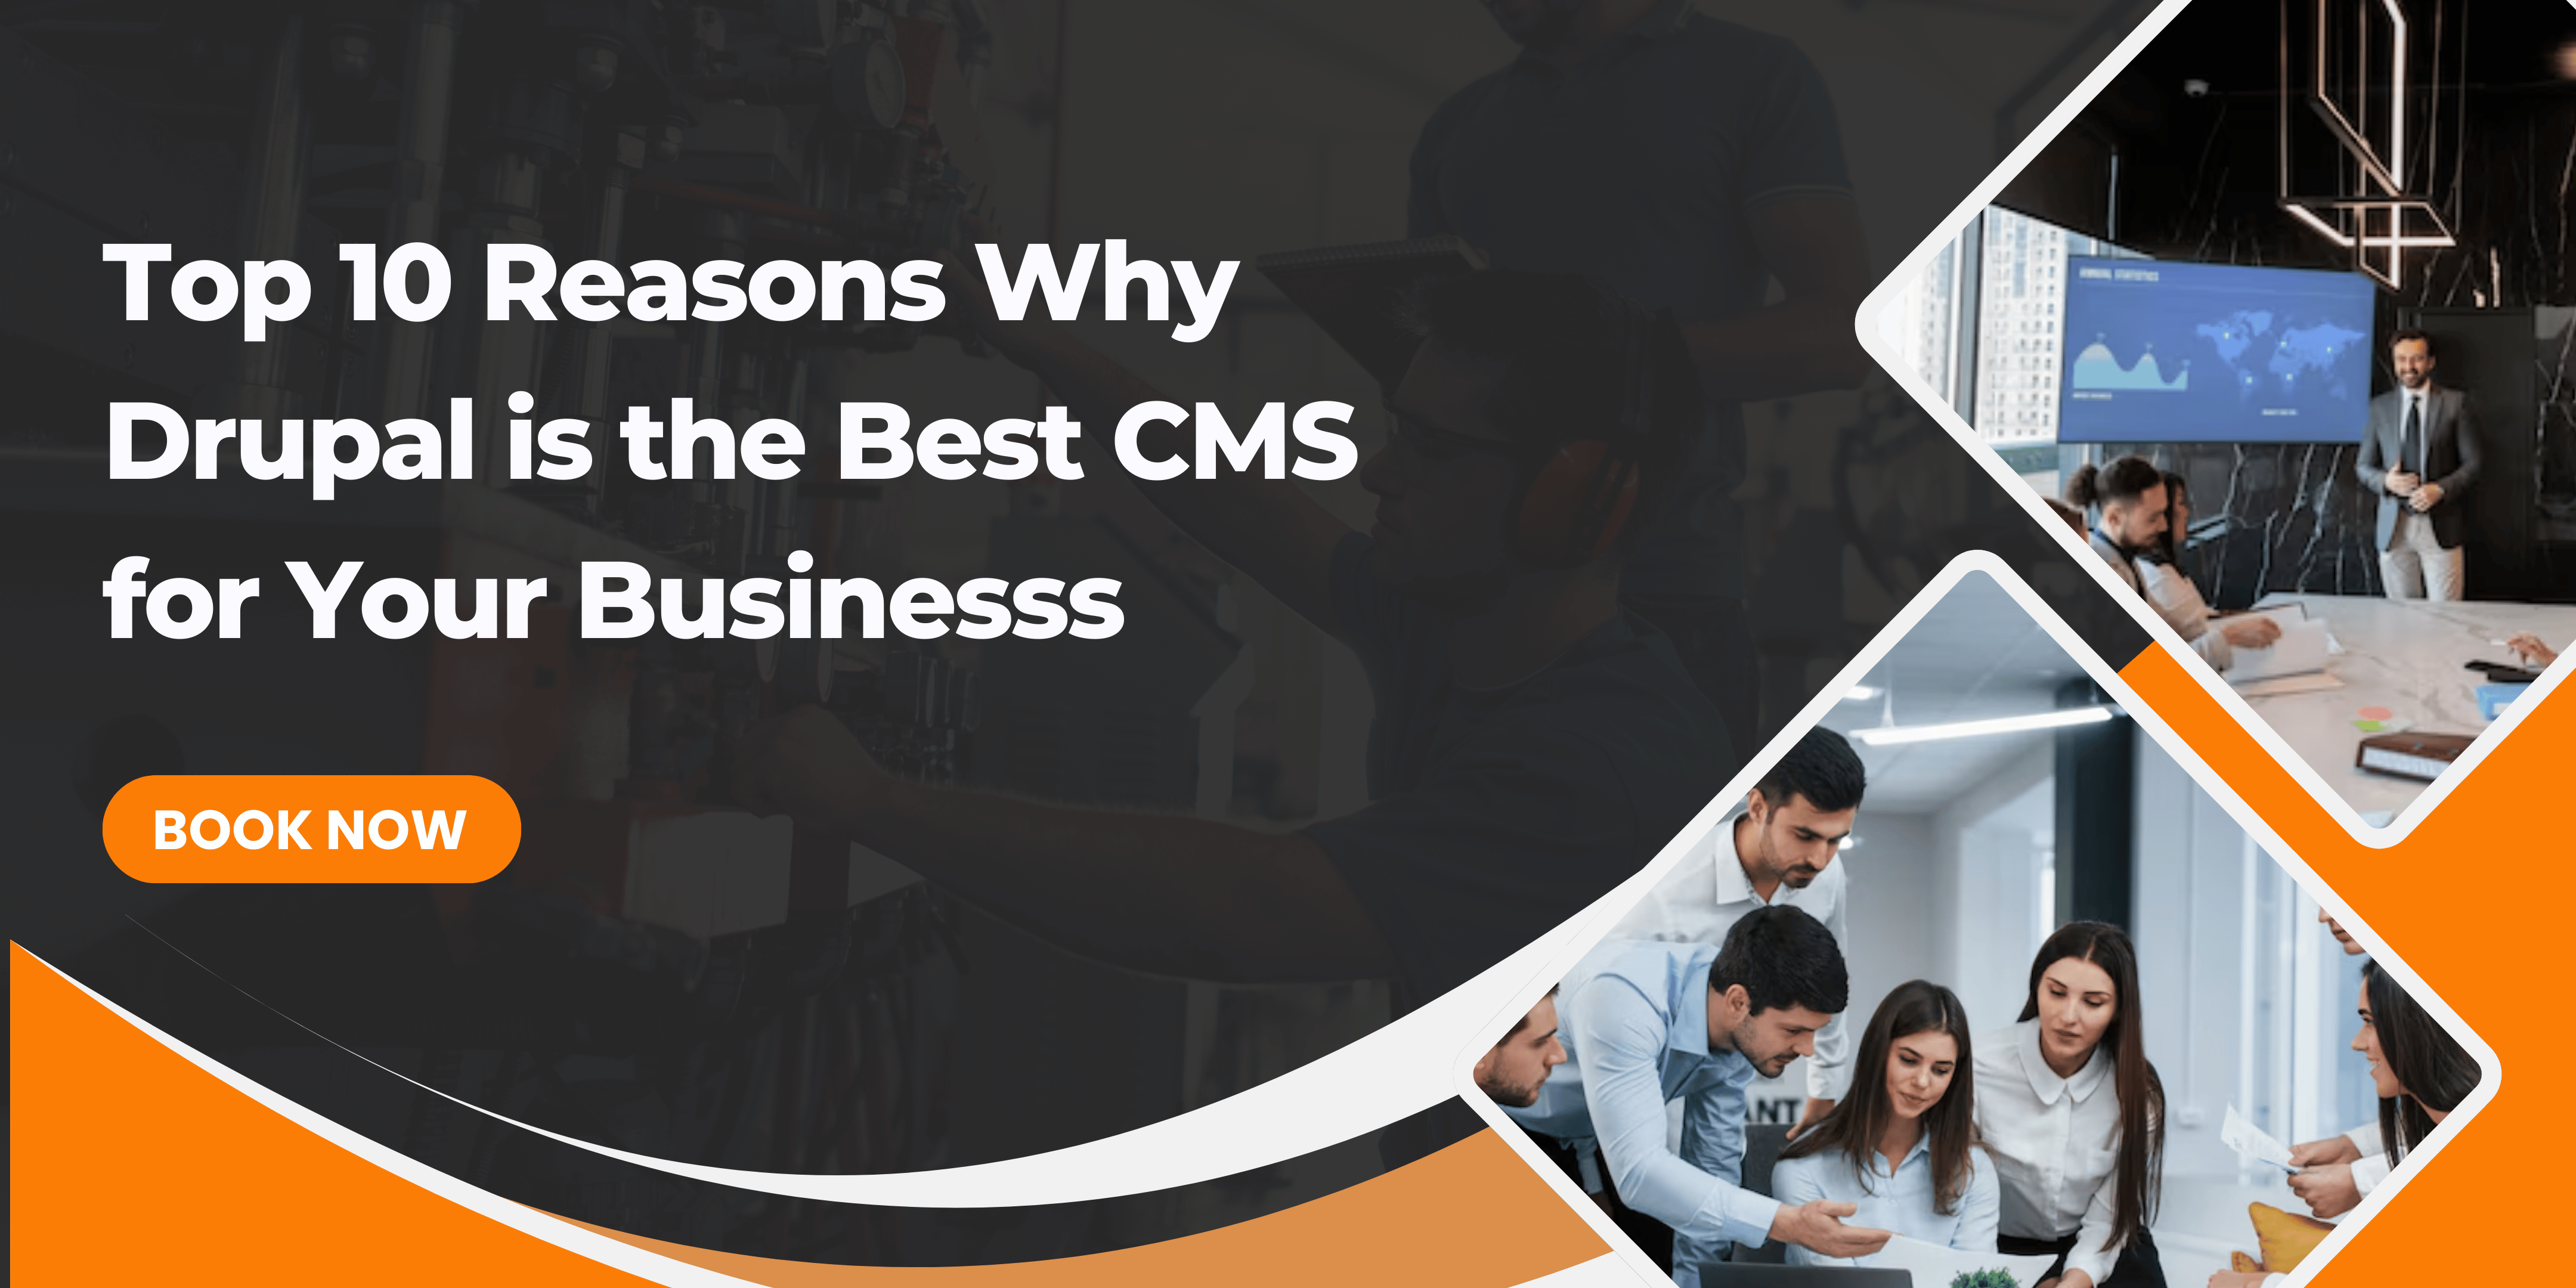 Top 10 Reasons Why Drupal is the Best CMS